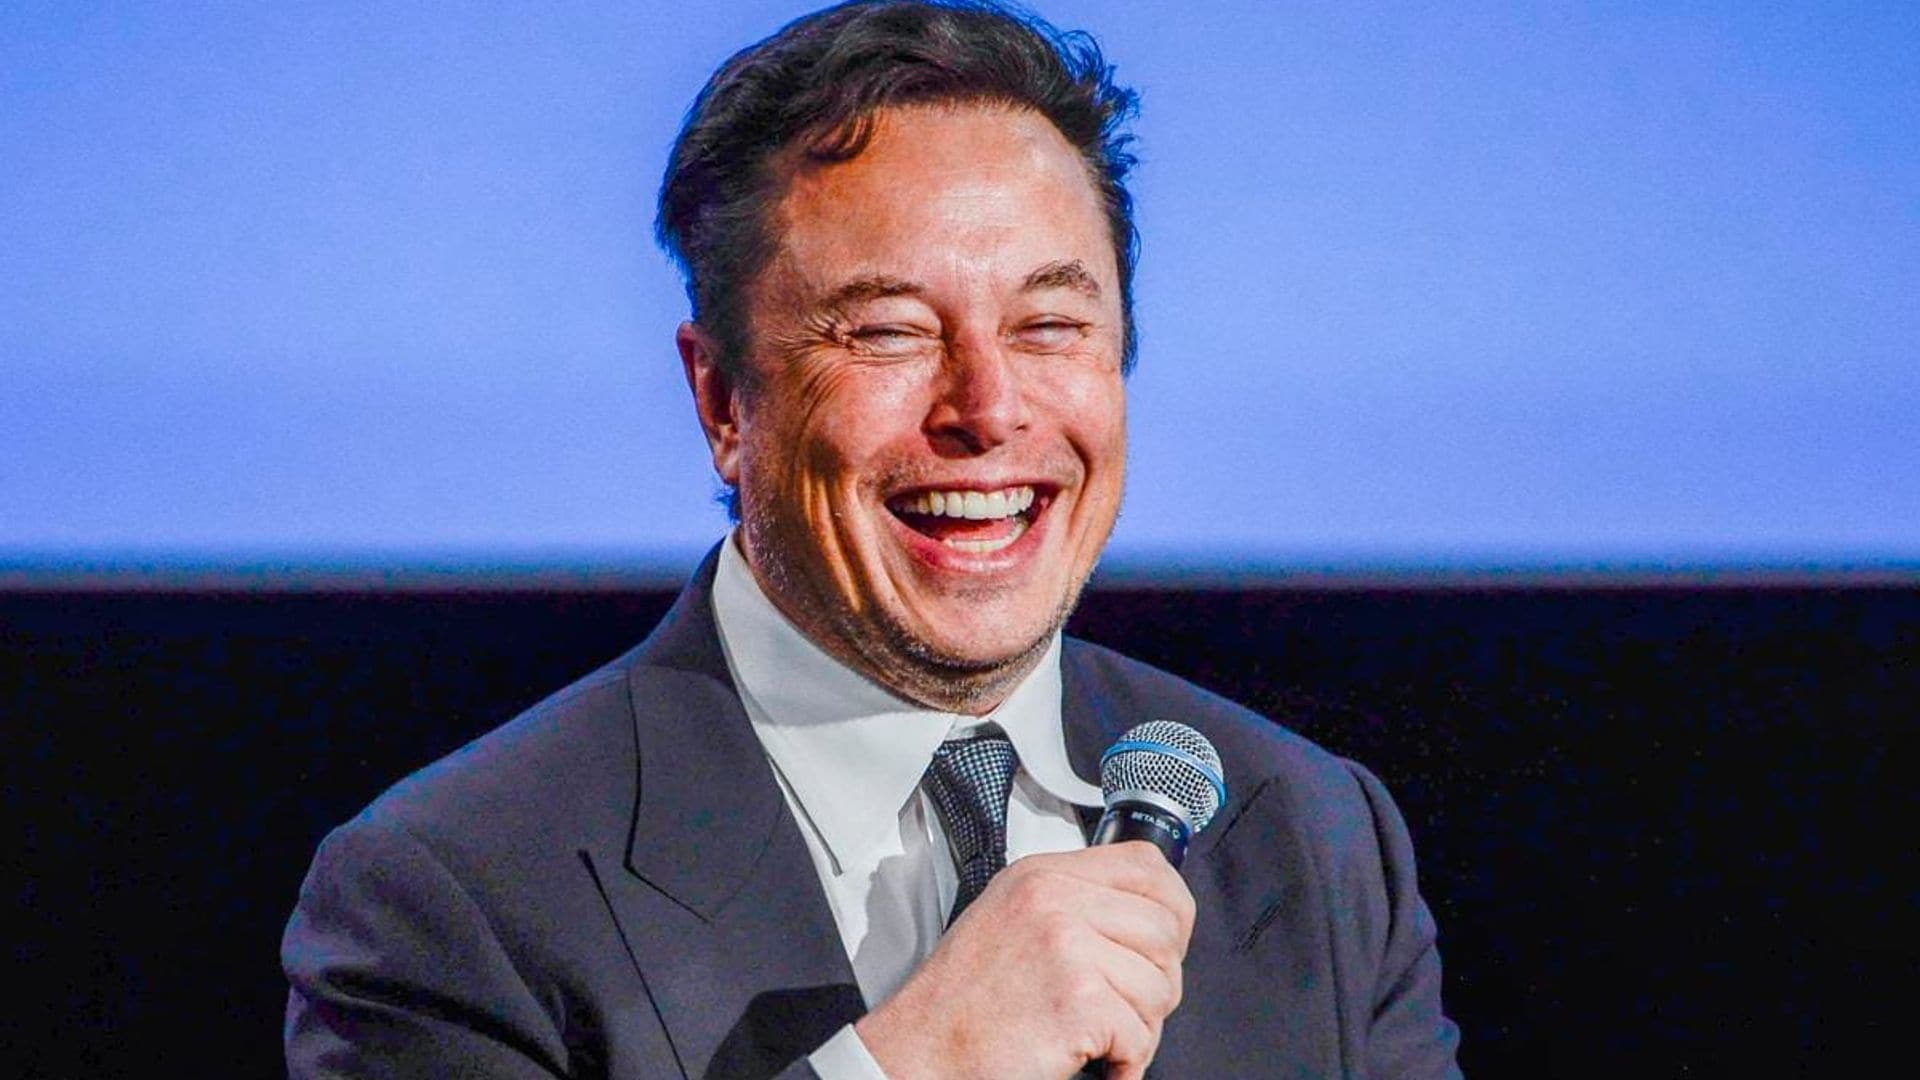 Is Elon Musk having more kids? The father of 10 shares family plans